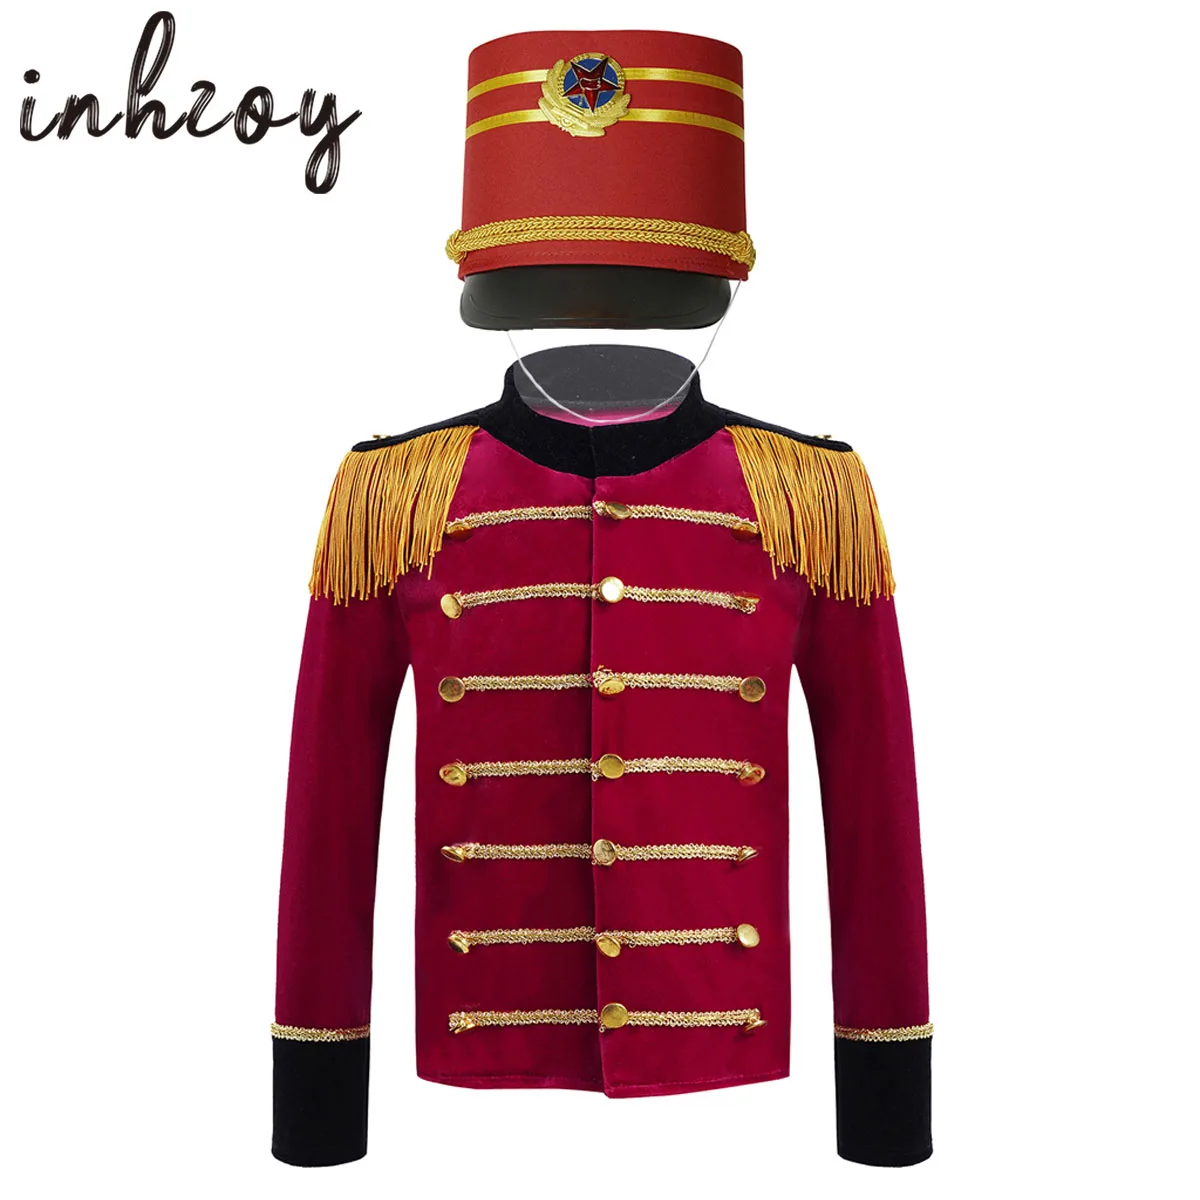 America Drum Costume Kids Girls Boys British Royal Guard Costume Queen Prince Guard Military Uniform Dress Up Marching Band Suit